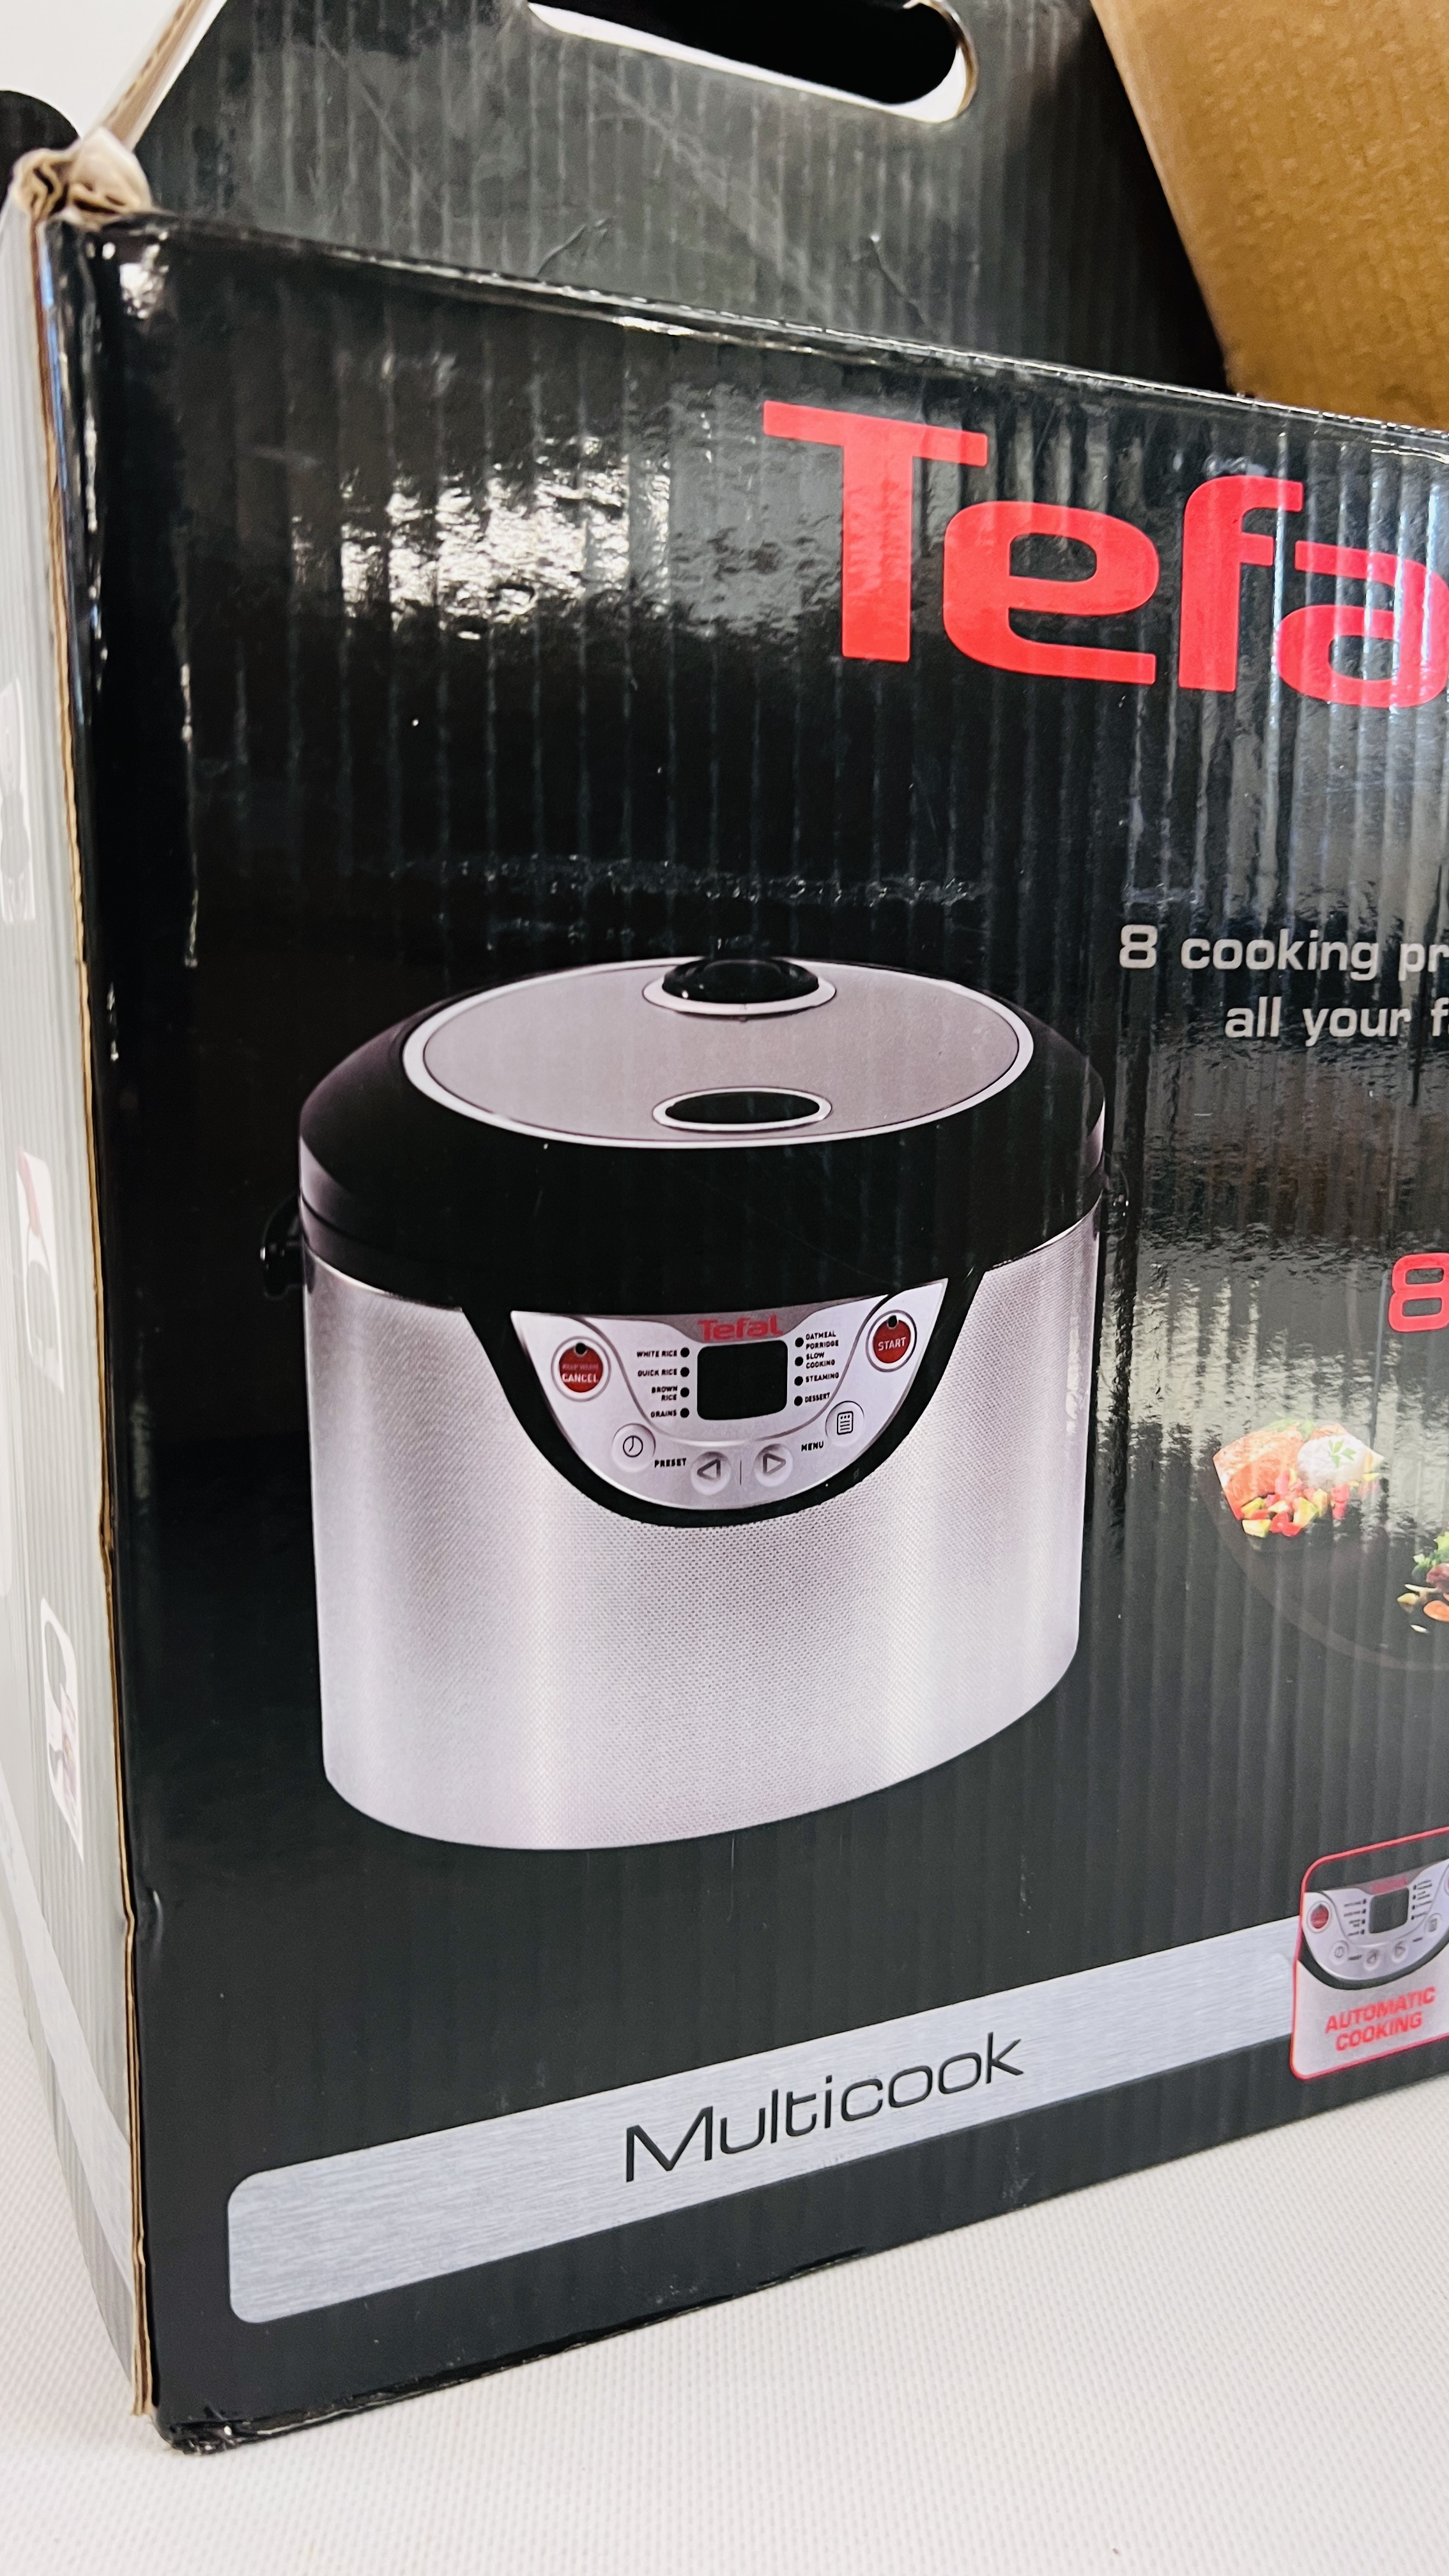 TEFAL MULTI COOK OVEN, BOXED UNUSED - SOLD AS SEEN. - Image 2 of 9